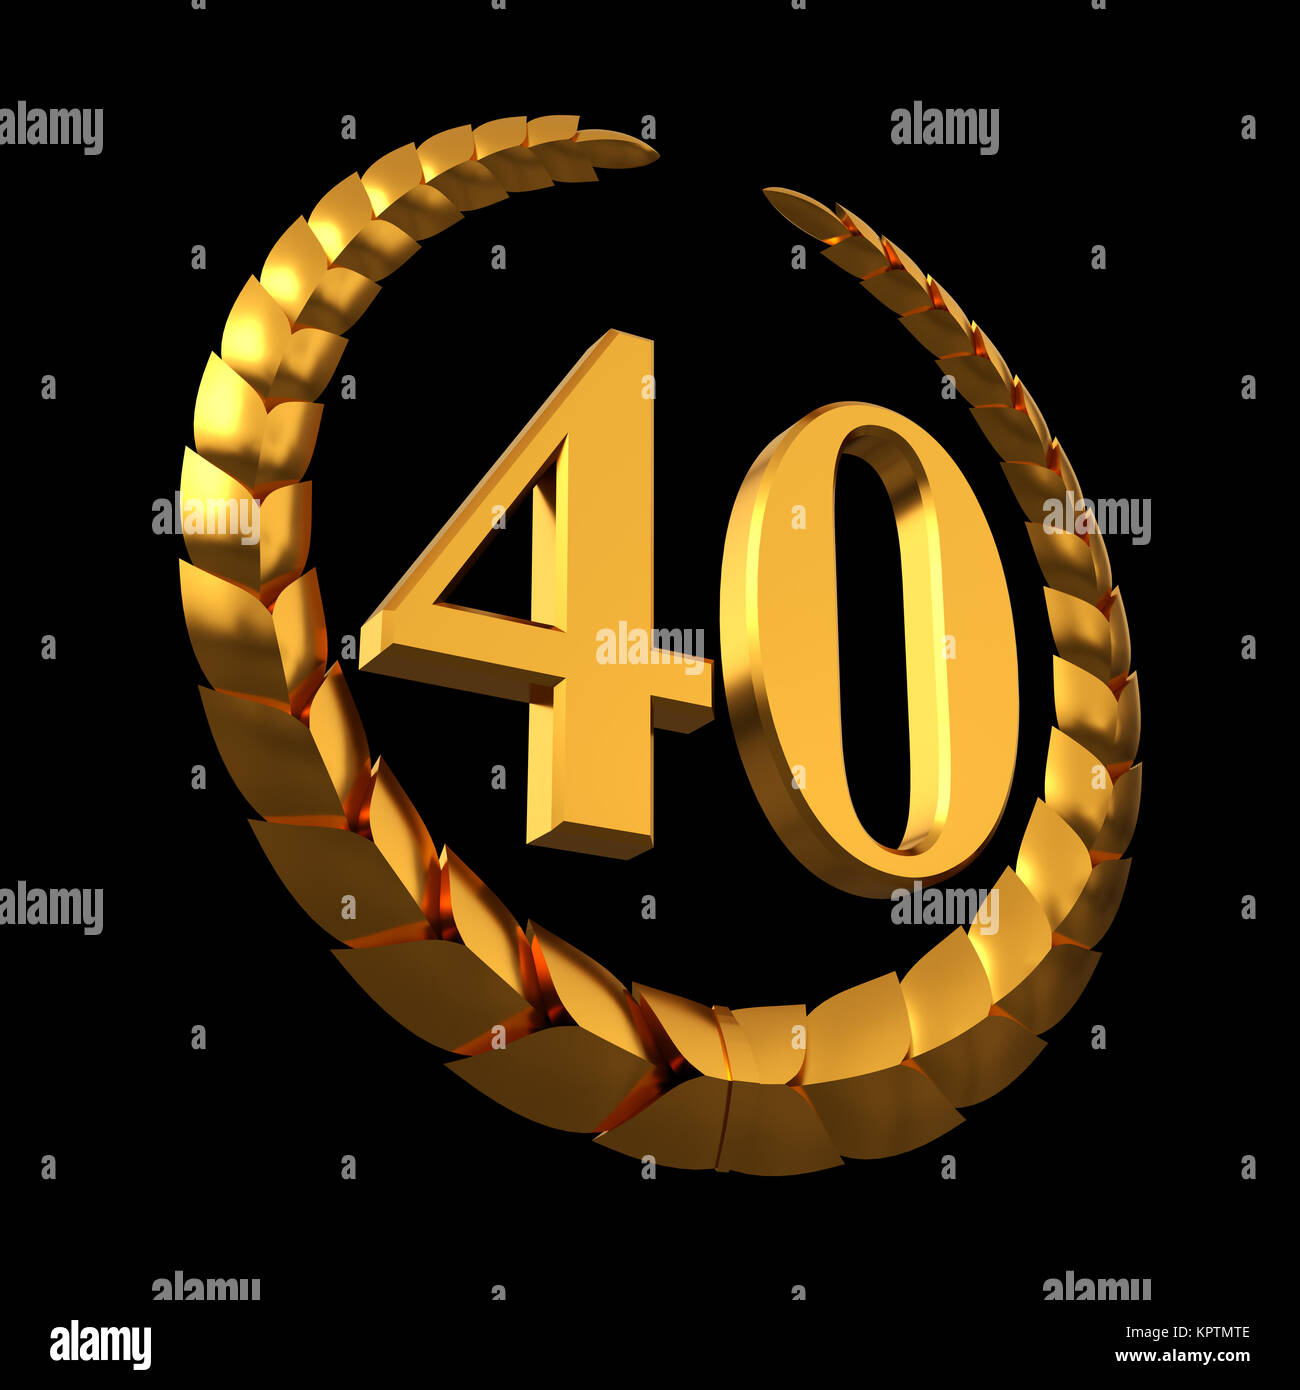 Anniversary Golden Laurel Wreath And Numeral 40 On Black Background Stock Photo